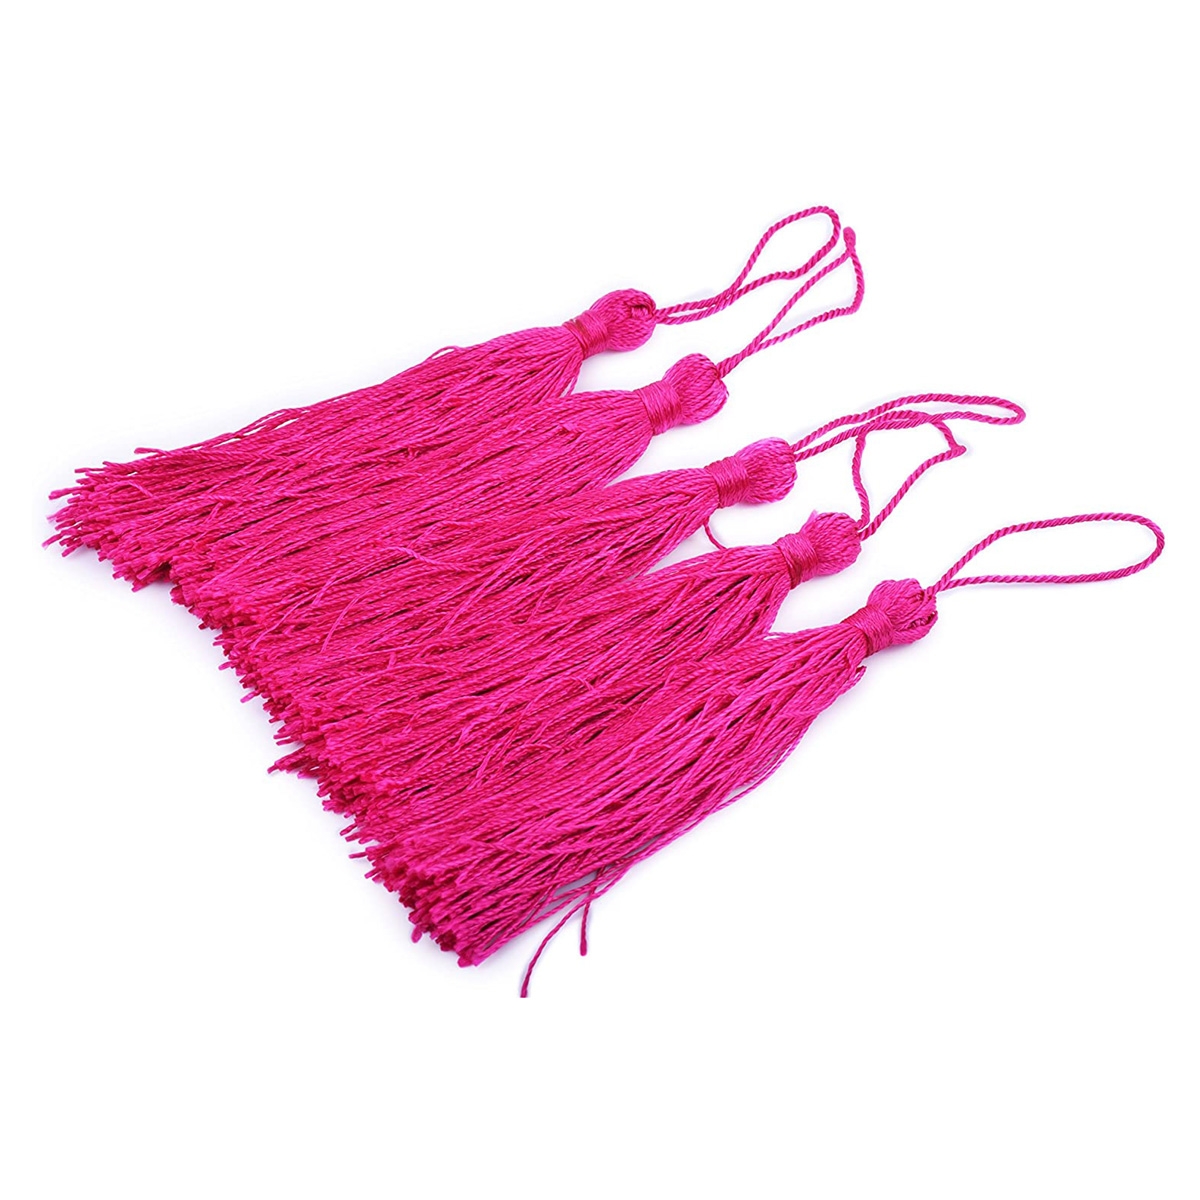 Handmade Tiny(3.5') Soft Craft Mini Tassels with Loops for Bookmarks Jewelry Making(rose)